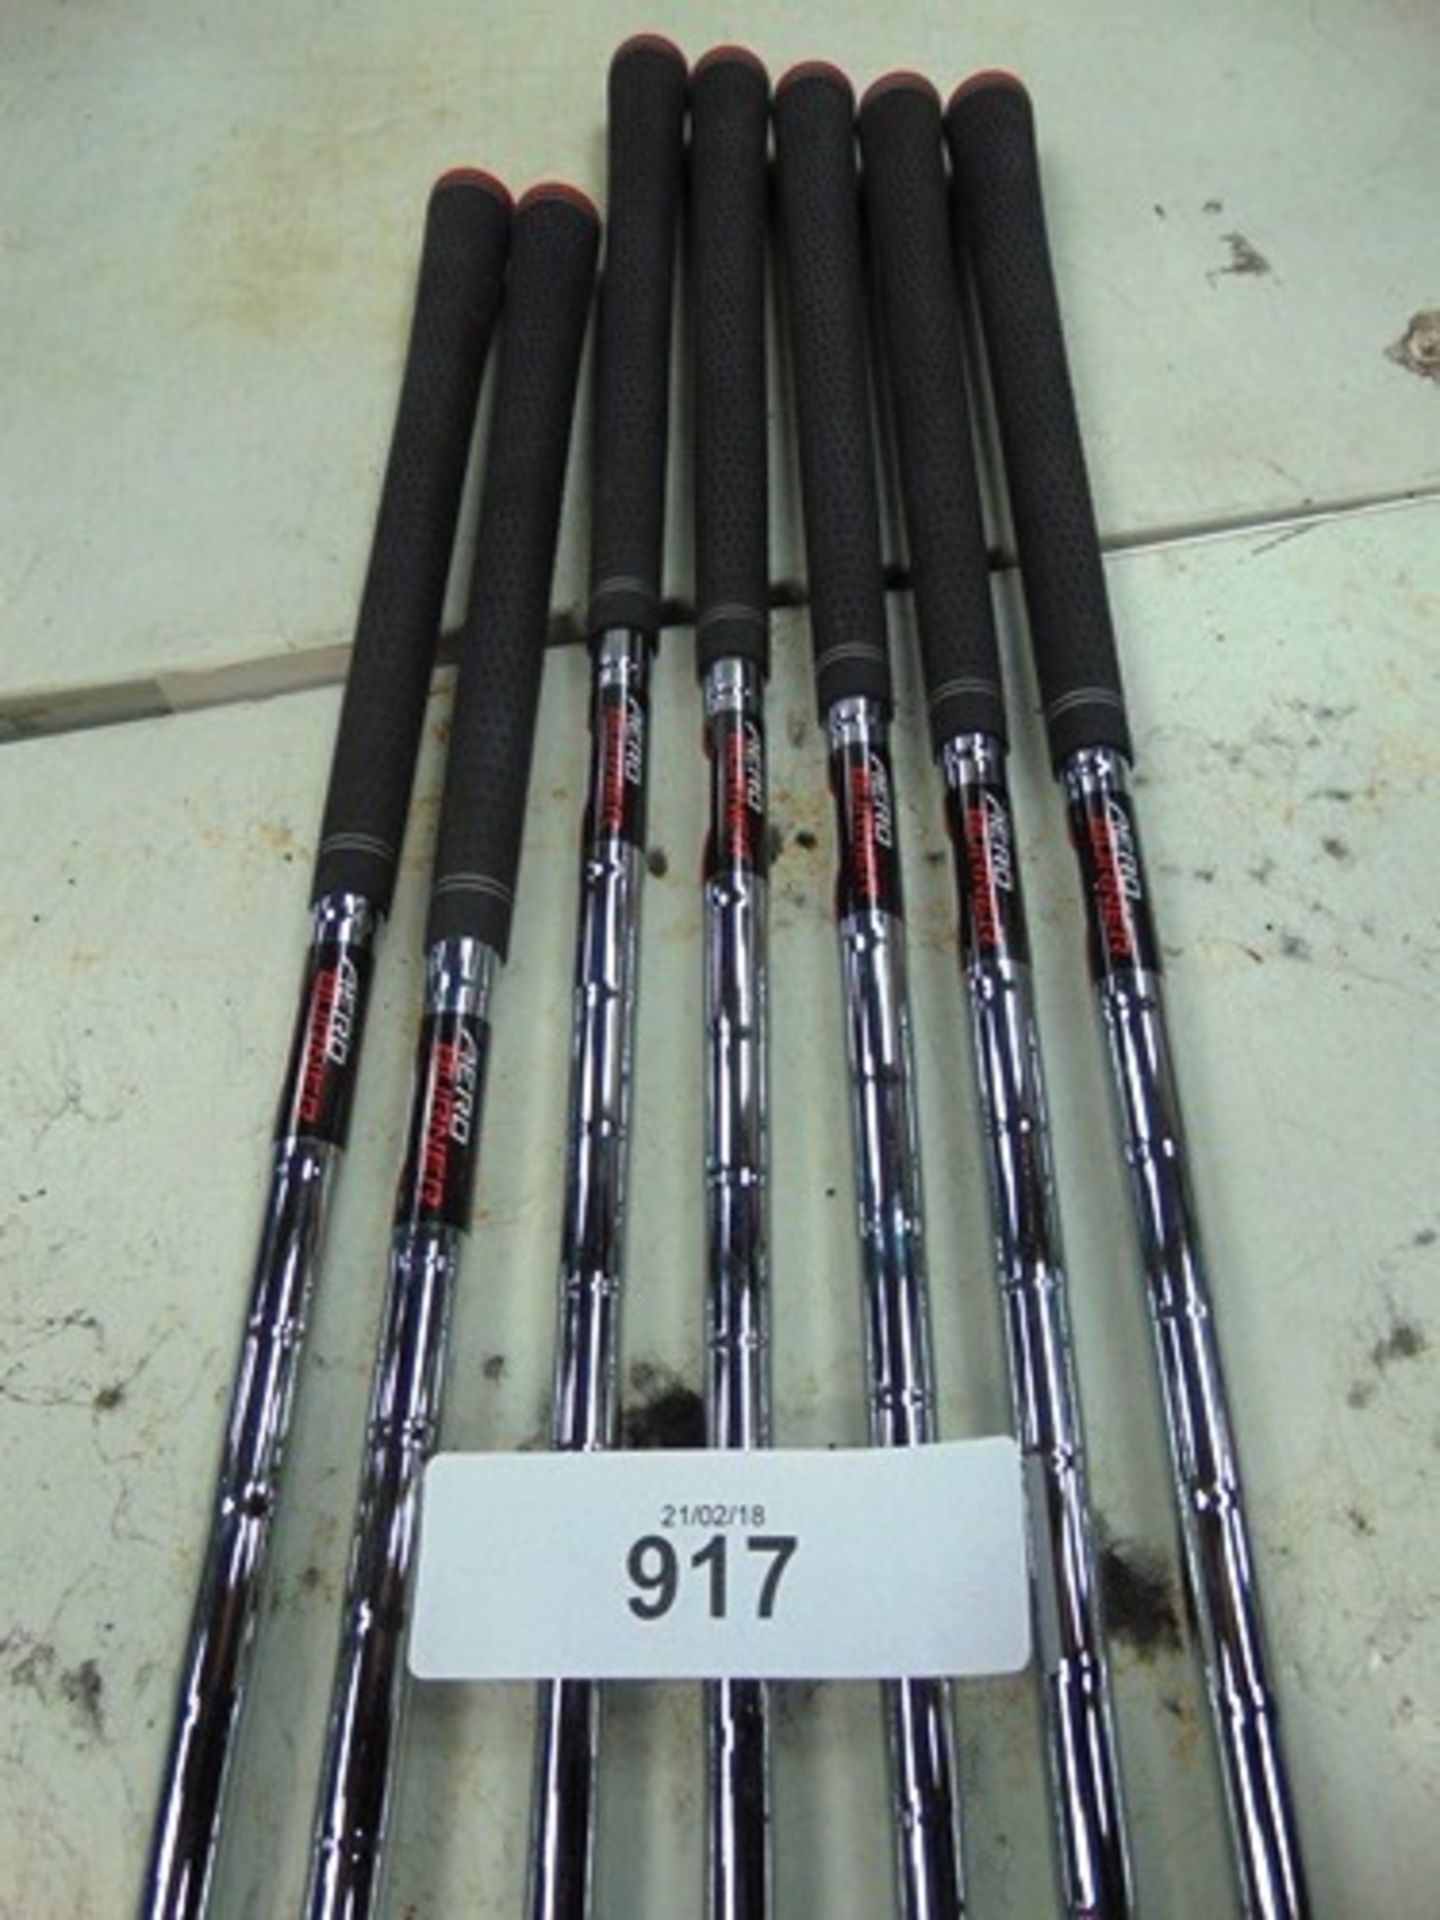 A set of Taylormade Aero Burner golf clubs no's 5 - 9, together with a matching pitch iron and